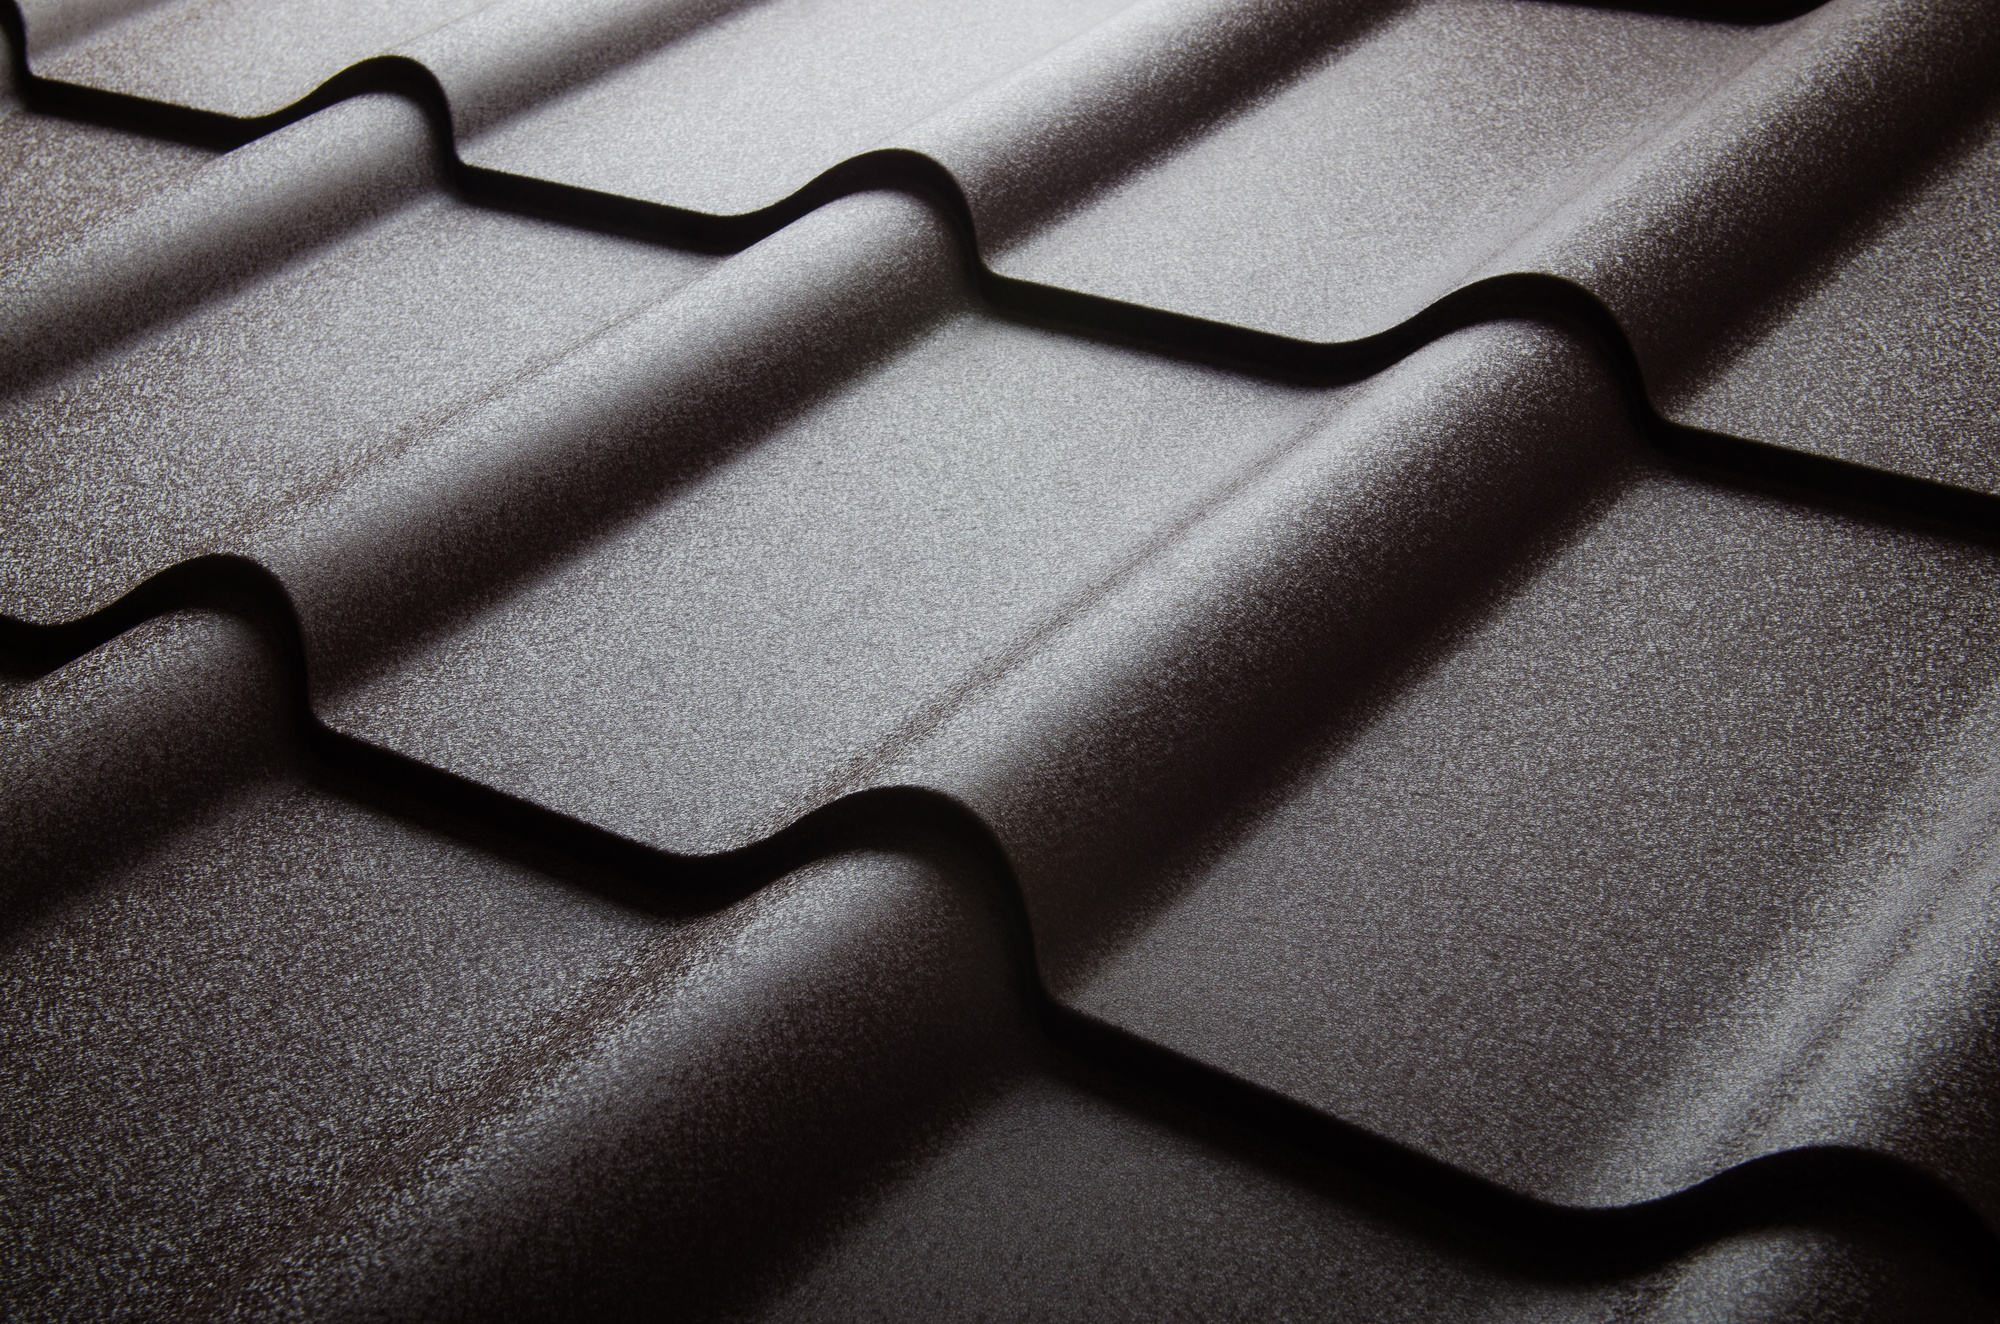 There are several types of roofing materials, but which is best for your home? Find out the benefits of each in this guide.